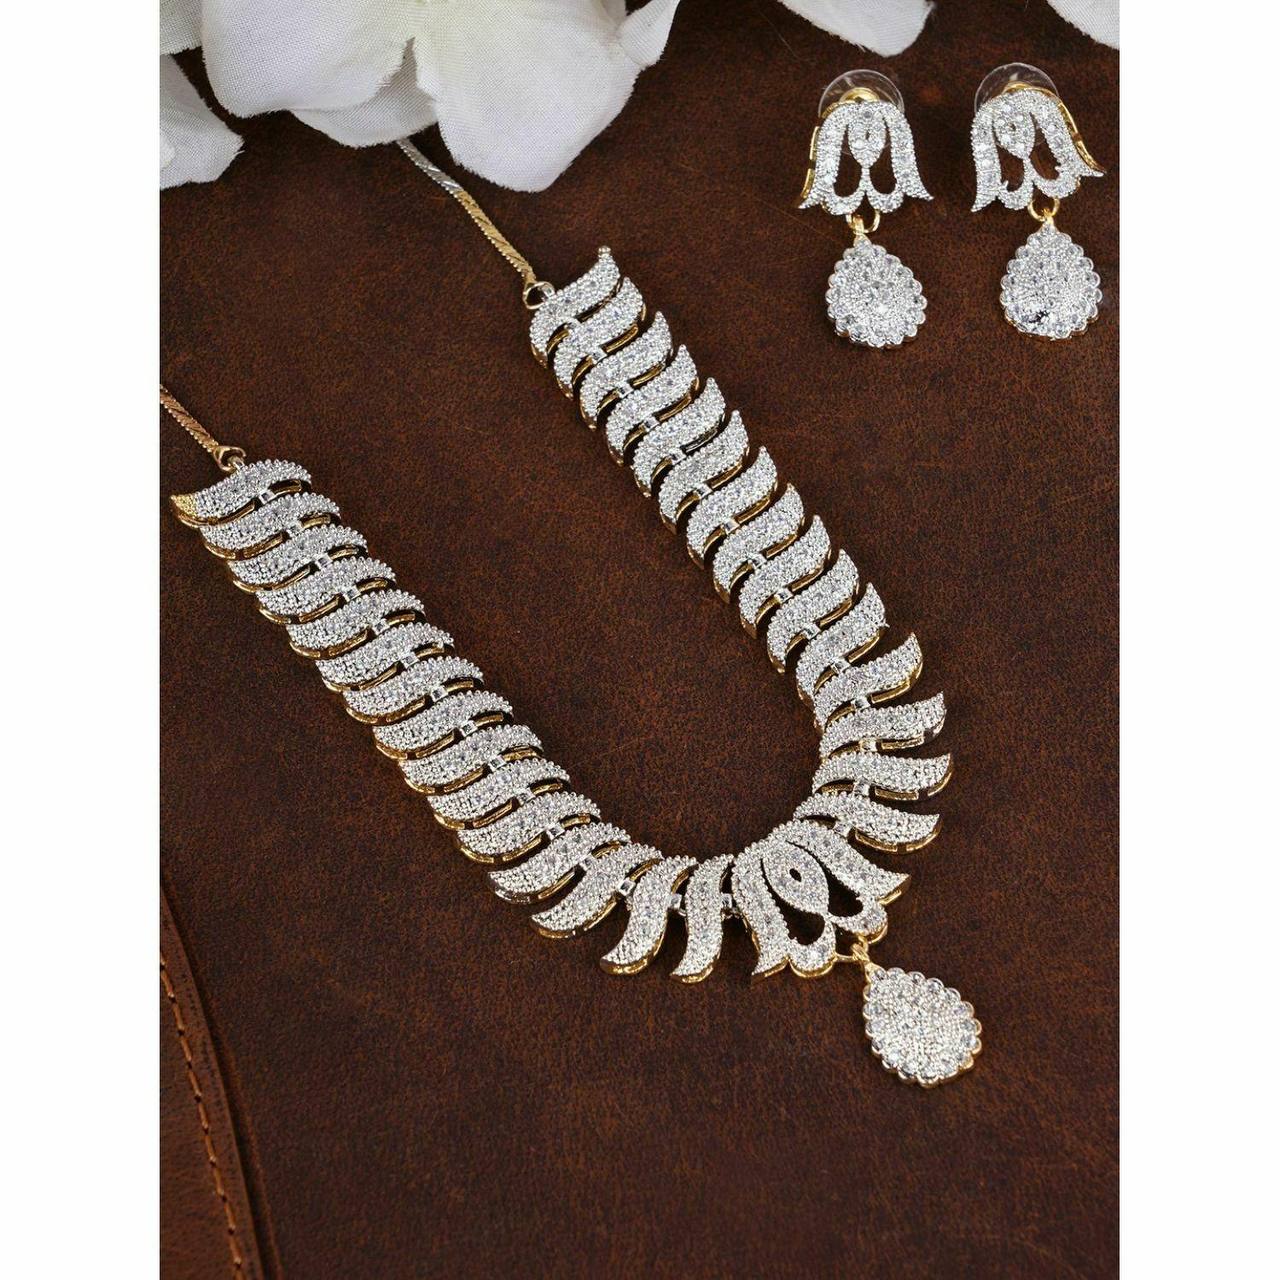 ZIRCONIA GOLD PLATED AD NECKLACES